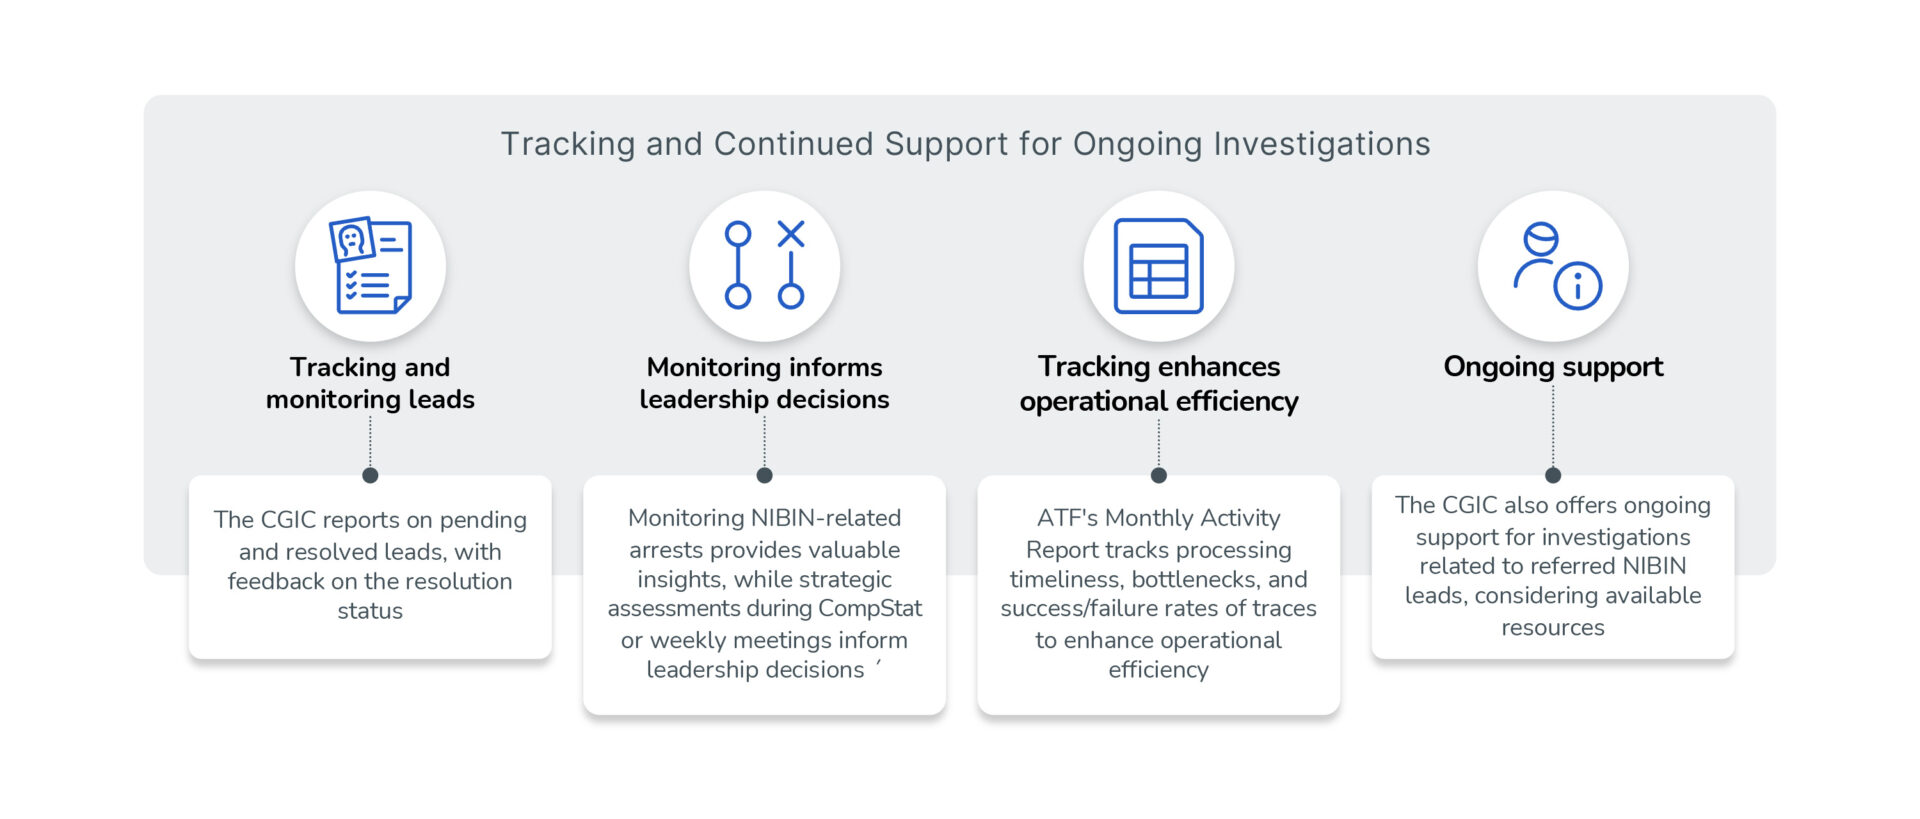 tracking-and-continued-support-ongoing-investigations